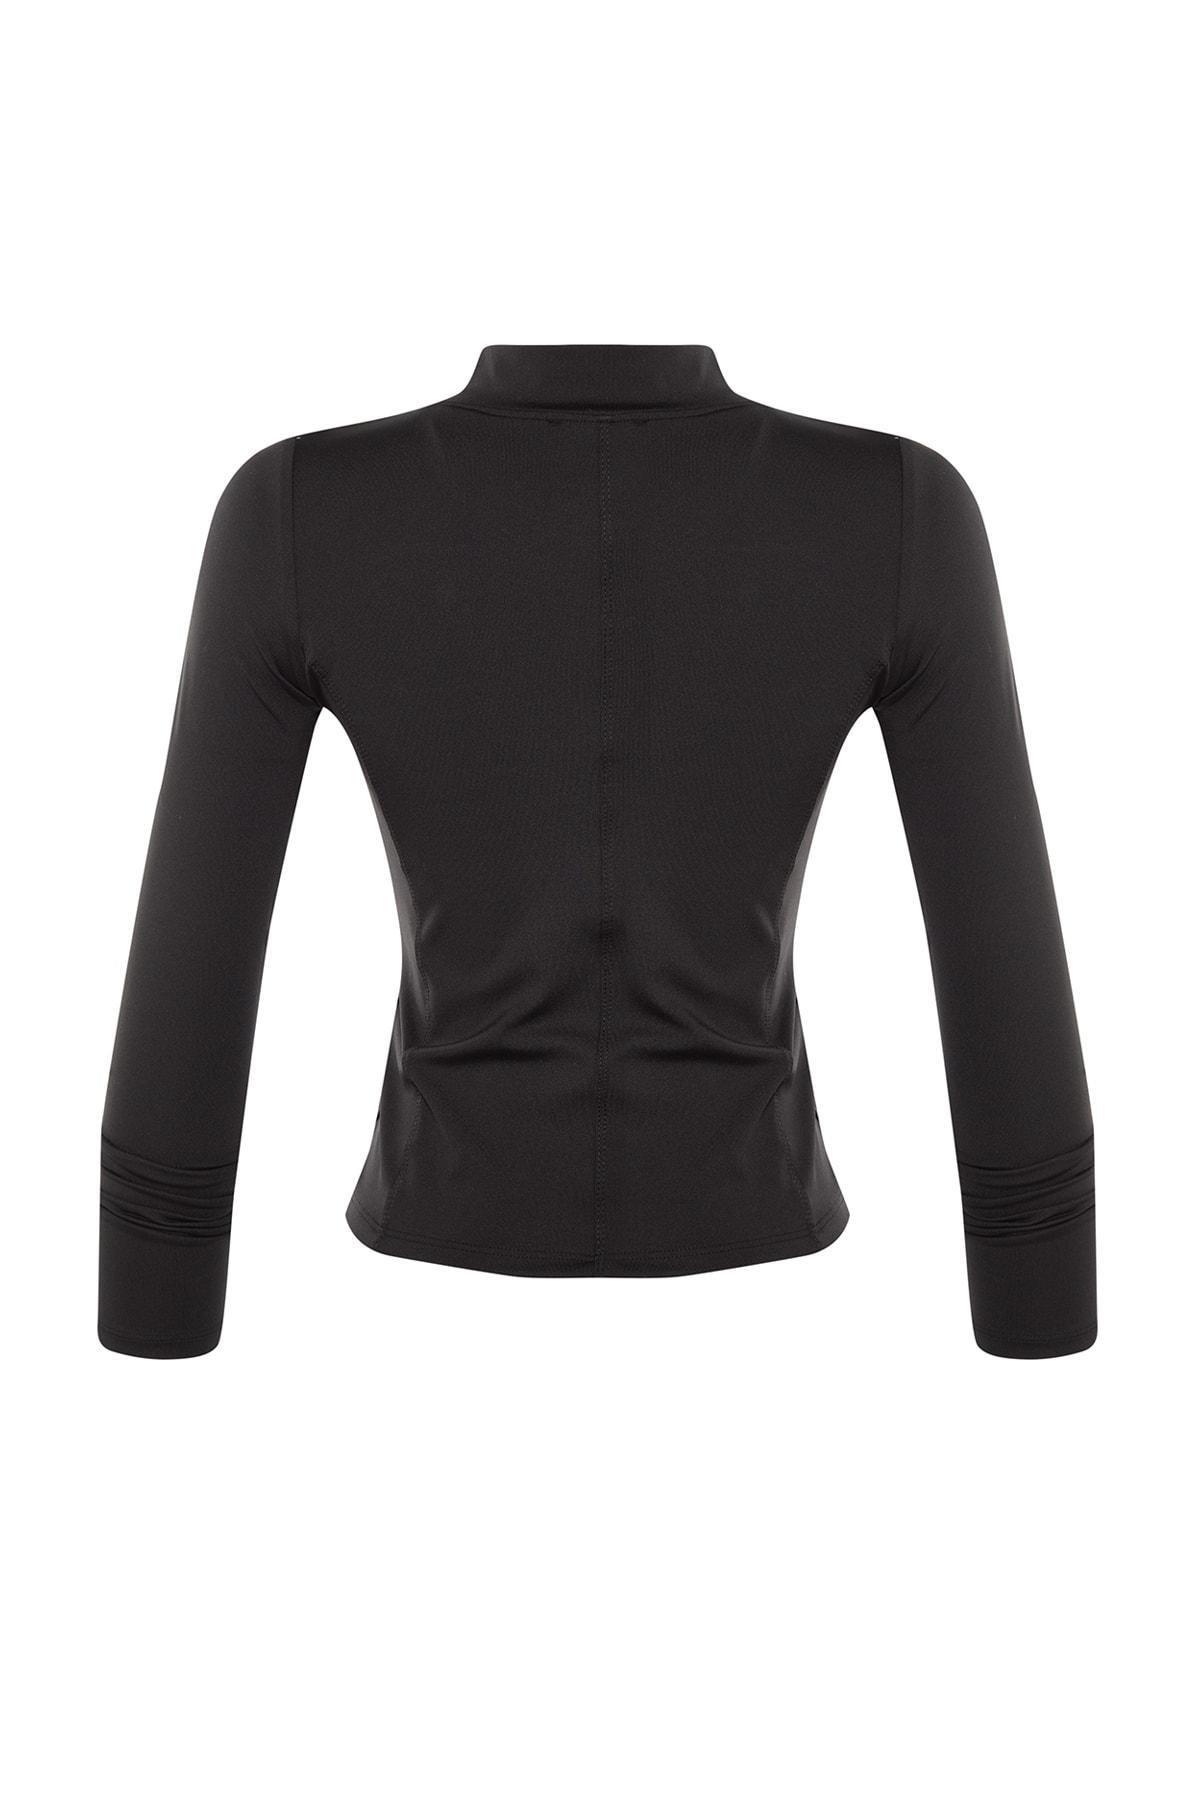 Trendyol - Black Fitted Blouse